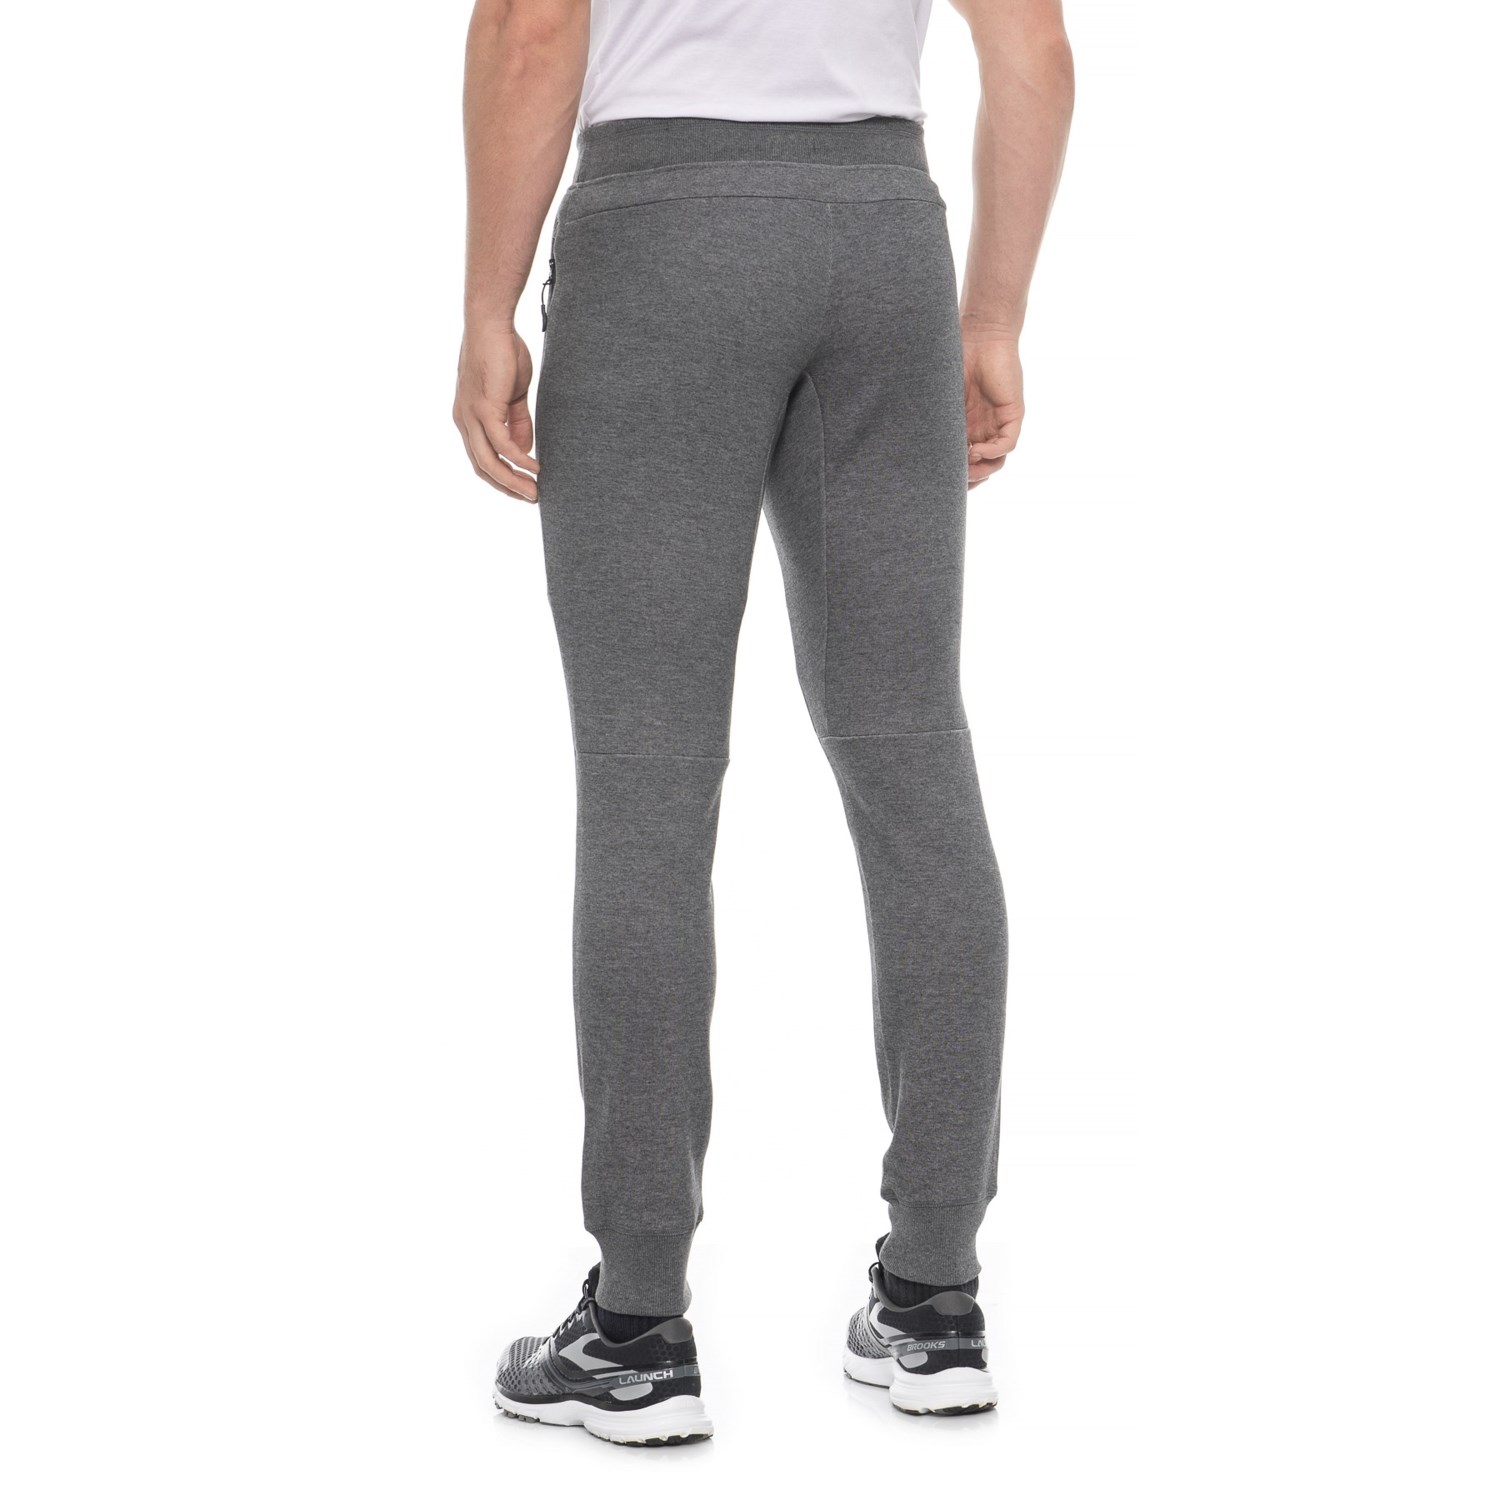 Kyodan Double-Knit Joggers (For Men) - Save 50%